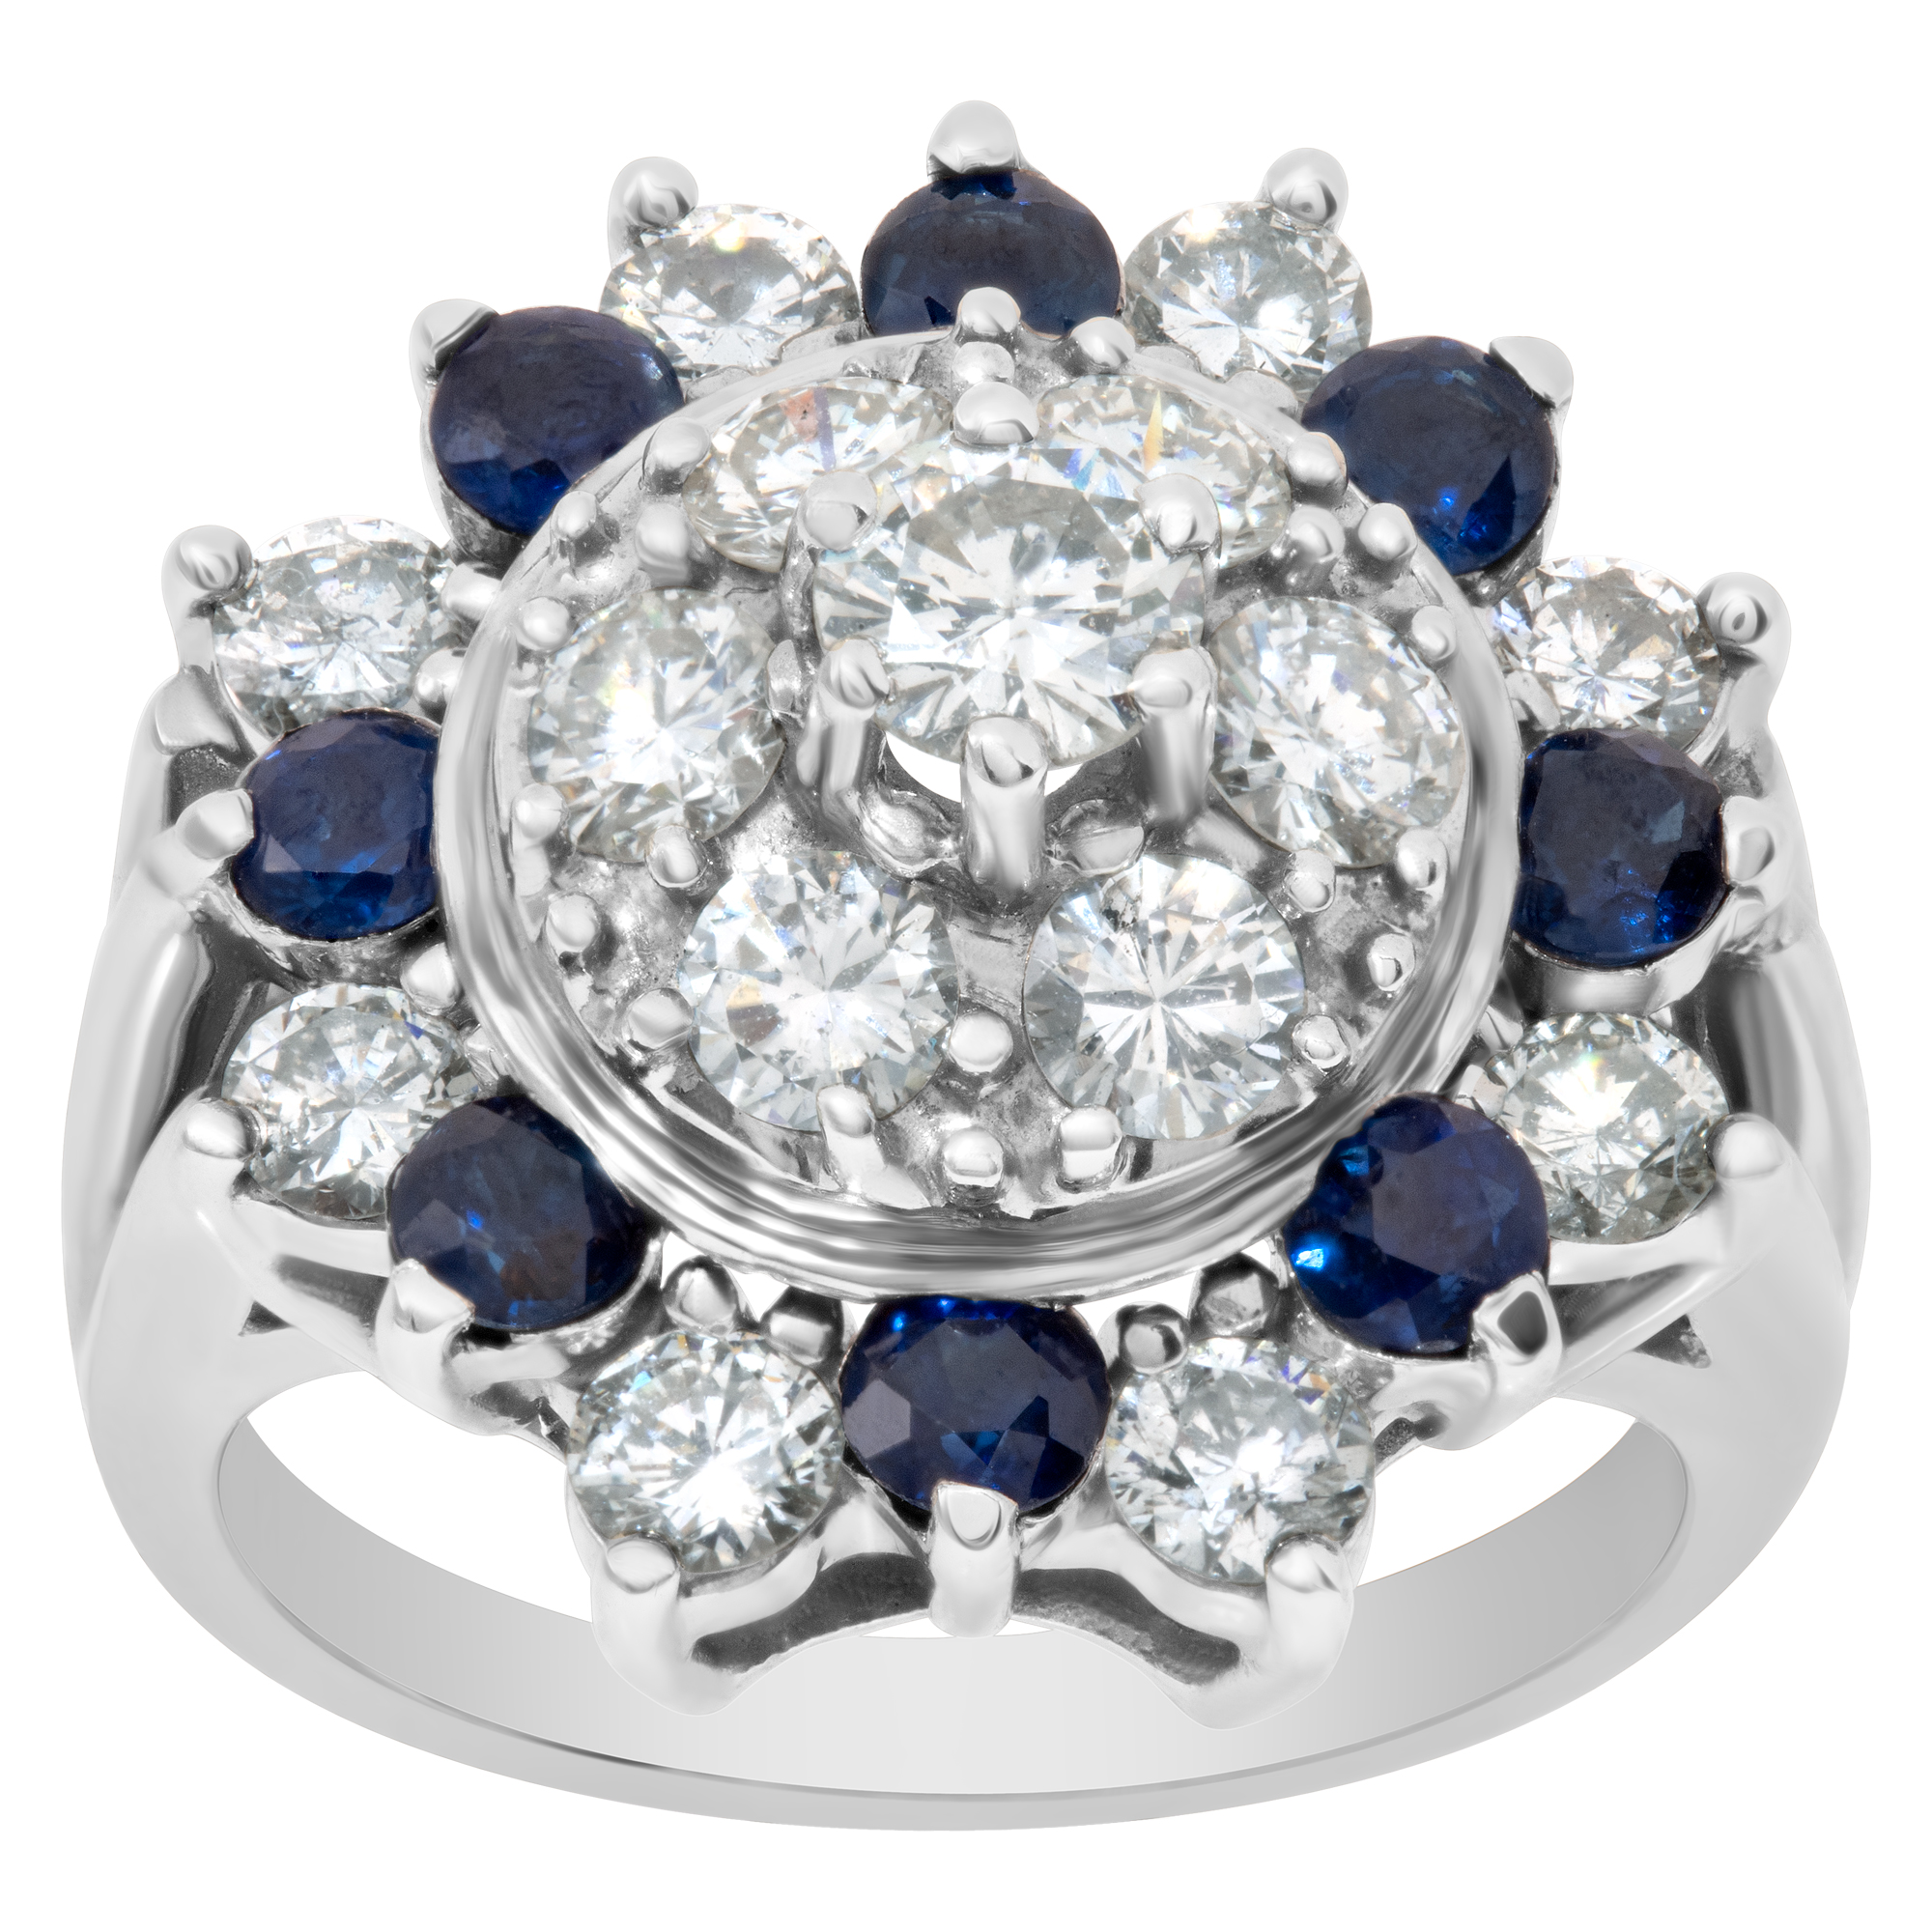 Vintage diamonds and sapphire ring set in 14K white gold. Round brilliant cut diamonds total approx weight over 2.00 carats. image 1